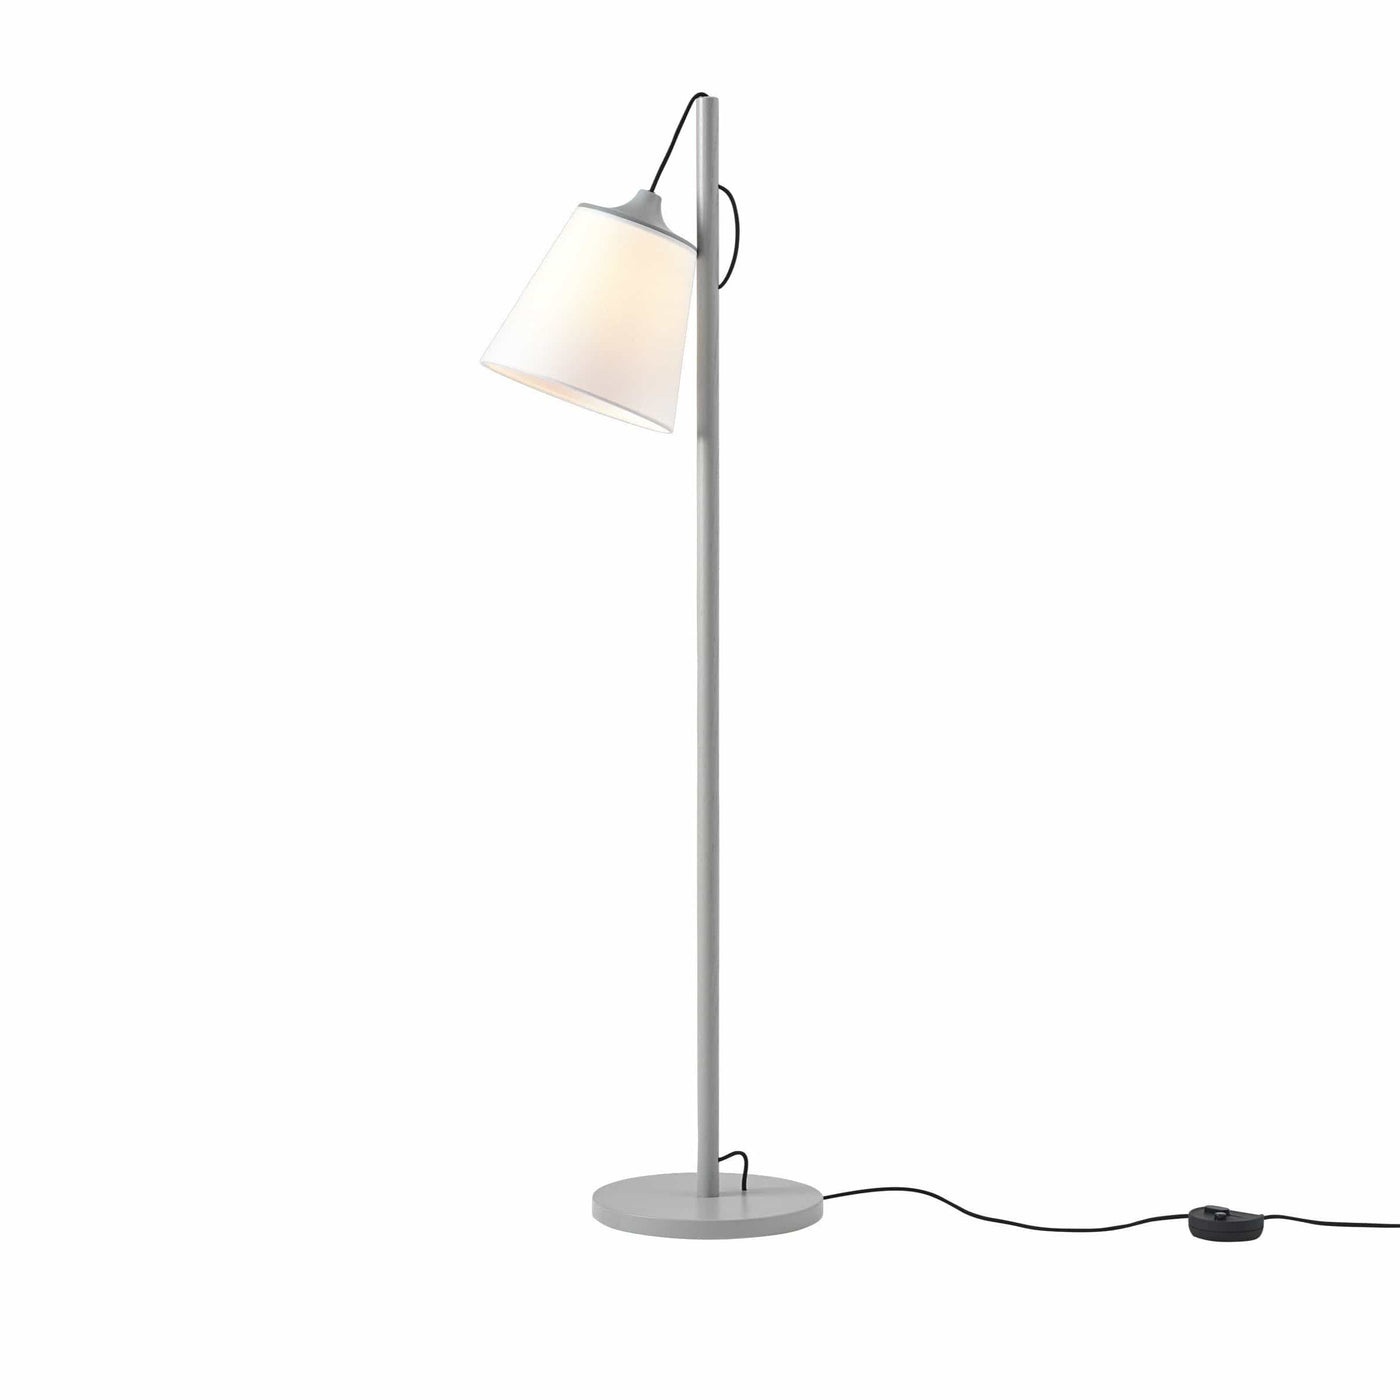 muuto pull floor lamp in grey, available at someday designs. #colour_grey